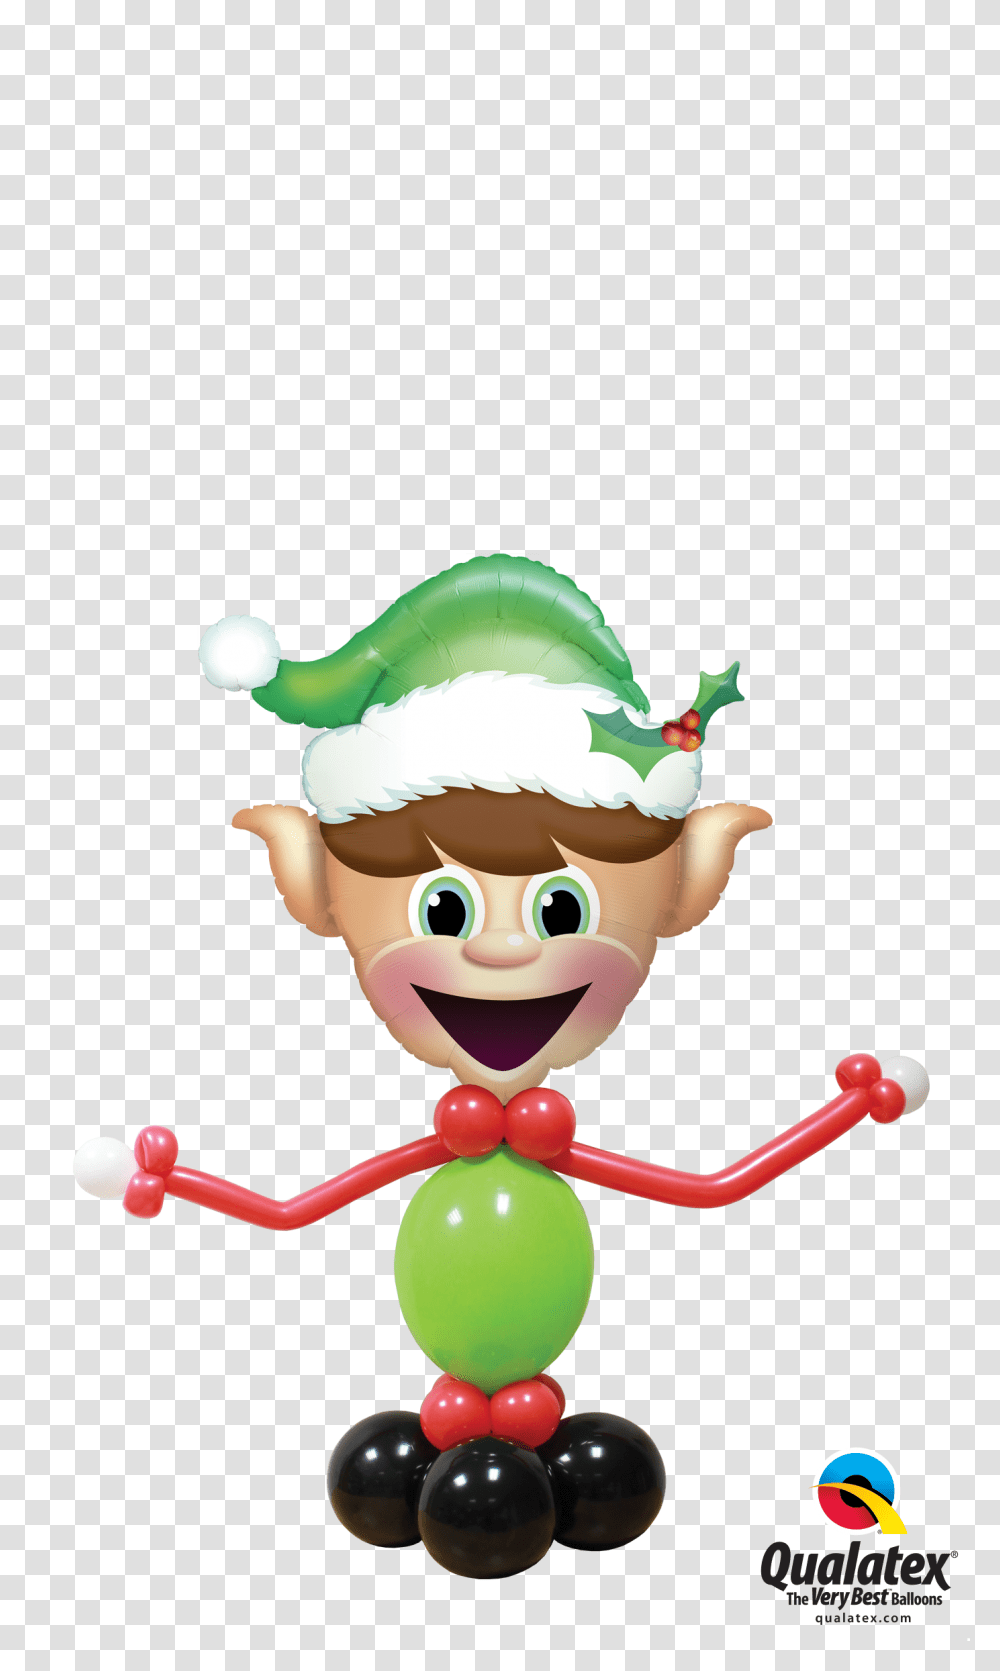 Qualatex Christmas Balloons Download Elf Supershape Balloon, Toy, Face Transparent Png